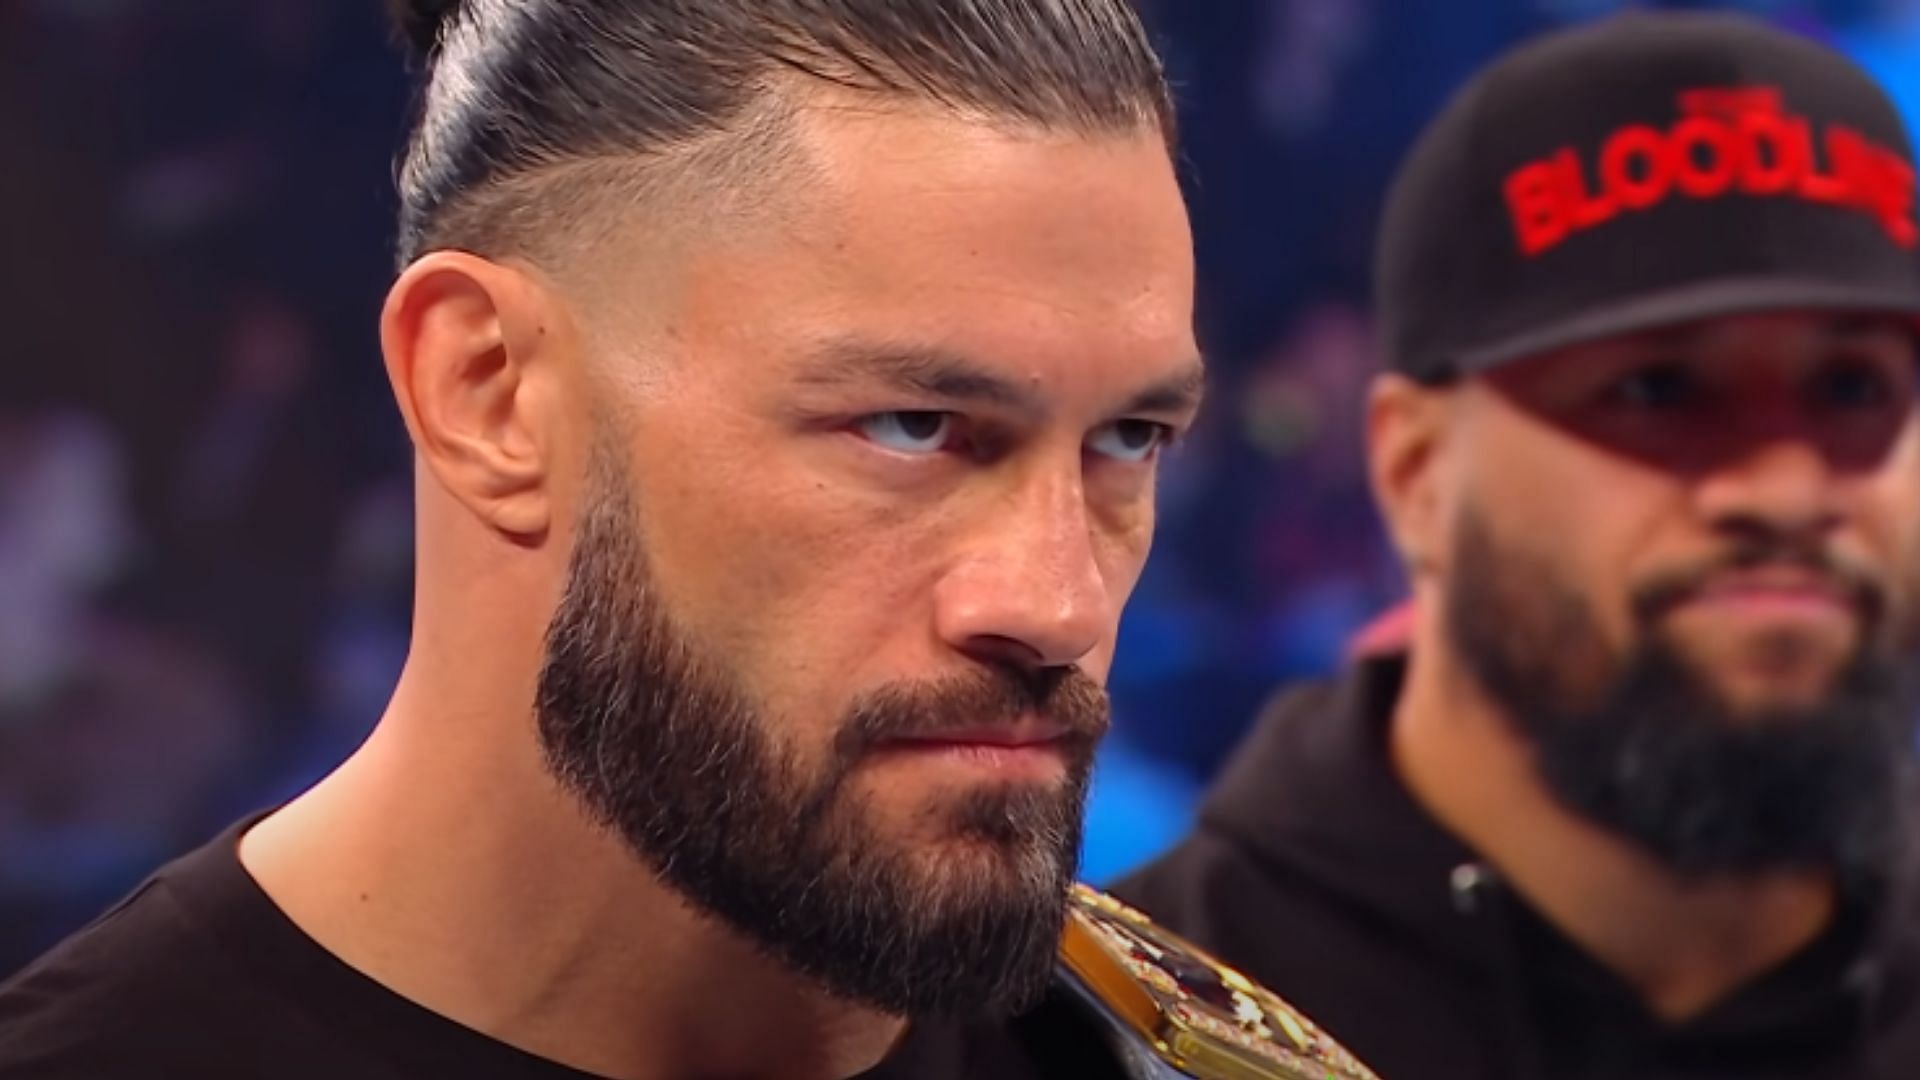 Reigns previously performed as WWE&#039;s top babyface